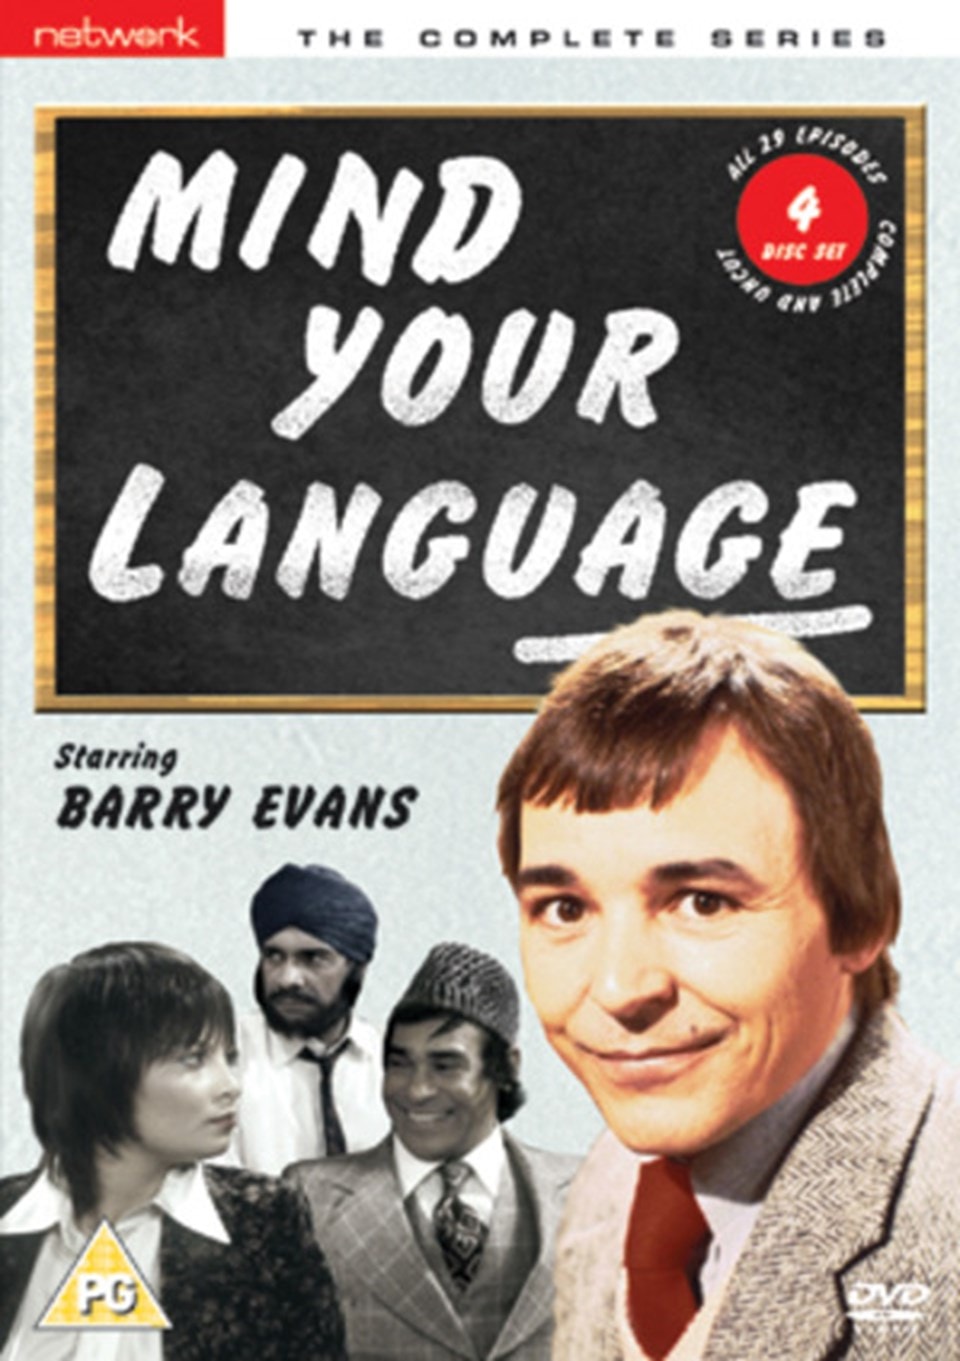 Mind Your Language The Complete Series Dvd Box Set Free Shipping Over £20 Hmv Store 